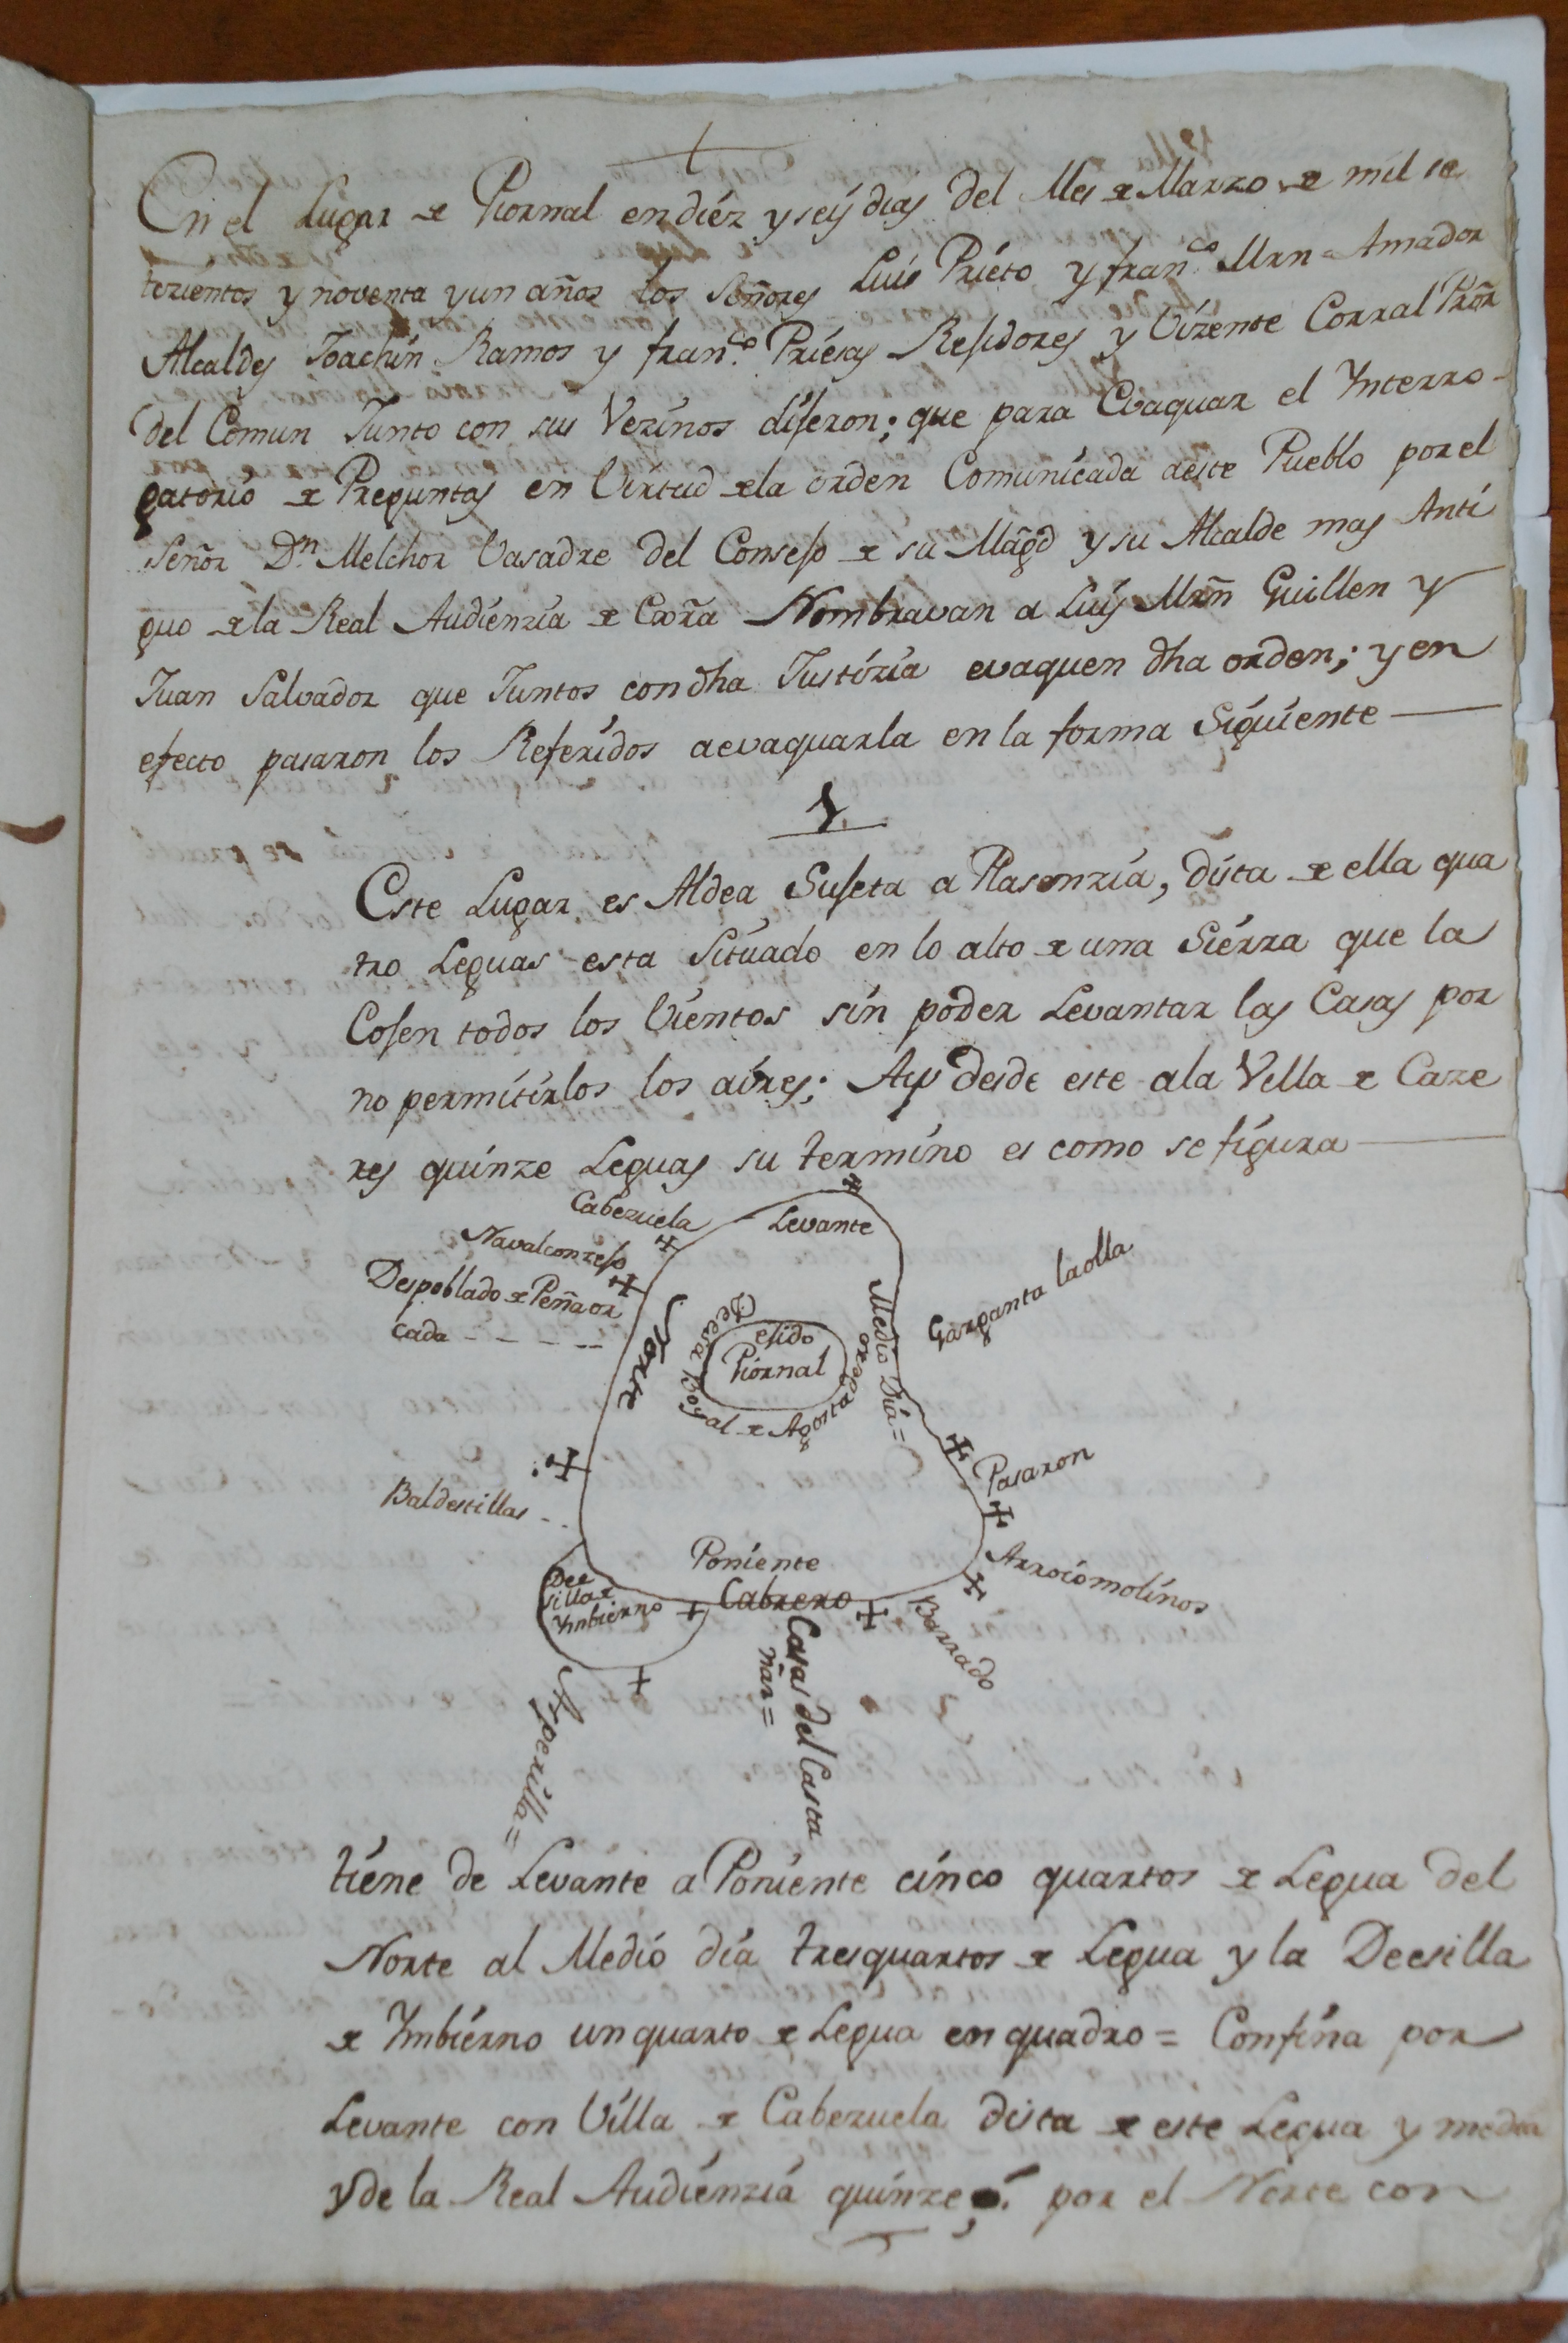 Historical Inquiry 1791 (Source: AHP Cáceres)